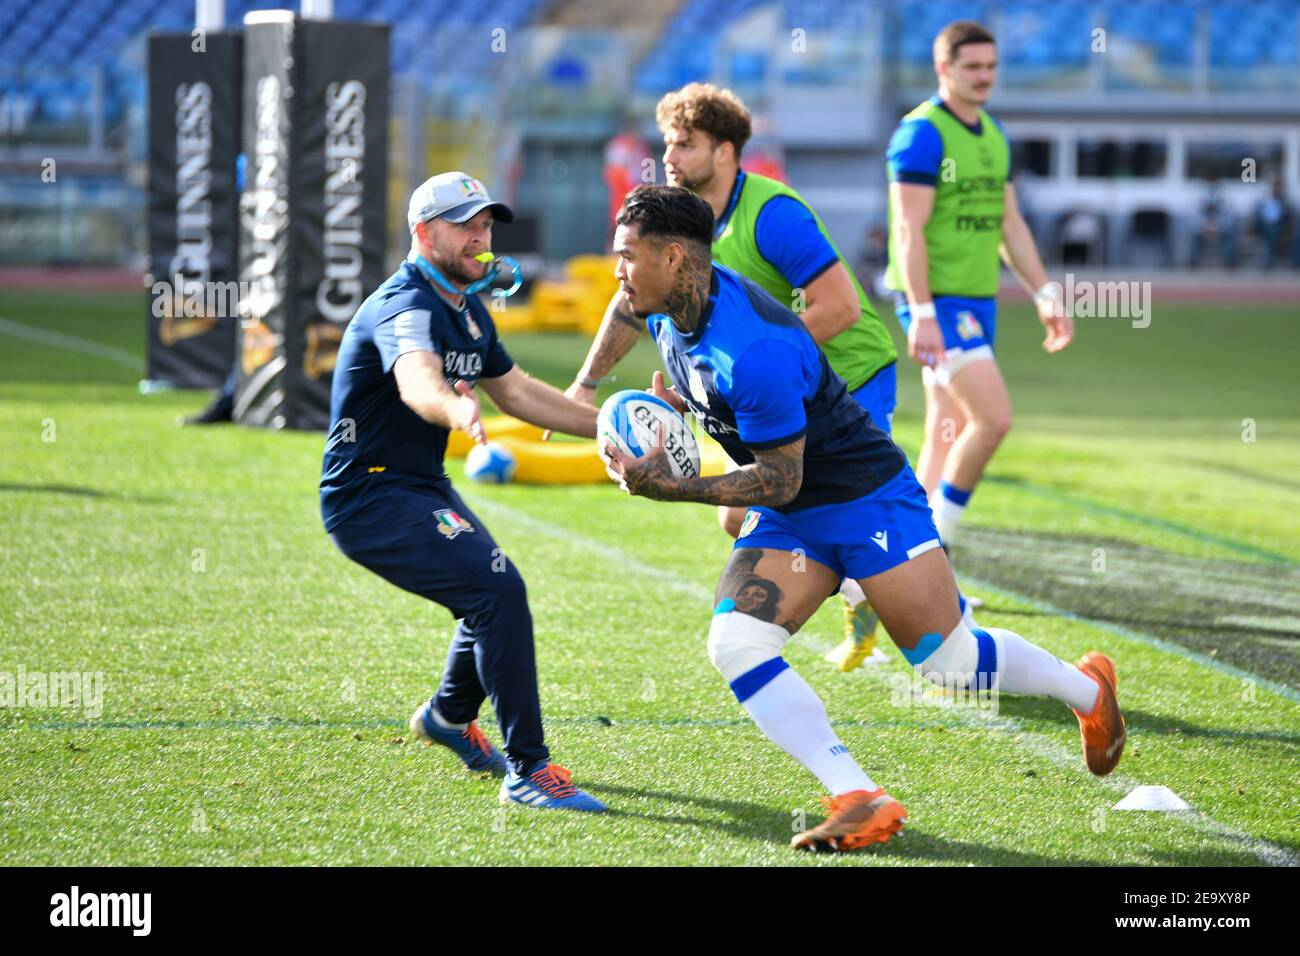 Rome, Italy. 6th Feb, 2021. Rome, Italy, Stadio Olimpico, February 06, 2021, Montanna Ioane (Italy) during Italy vs France - Rugby Six Nations match Credit: Carlo Cappuccitti/LPS/ZUMA Wire/Alamy Live News Stock Photo